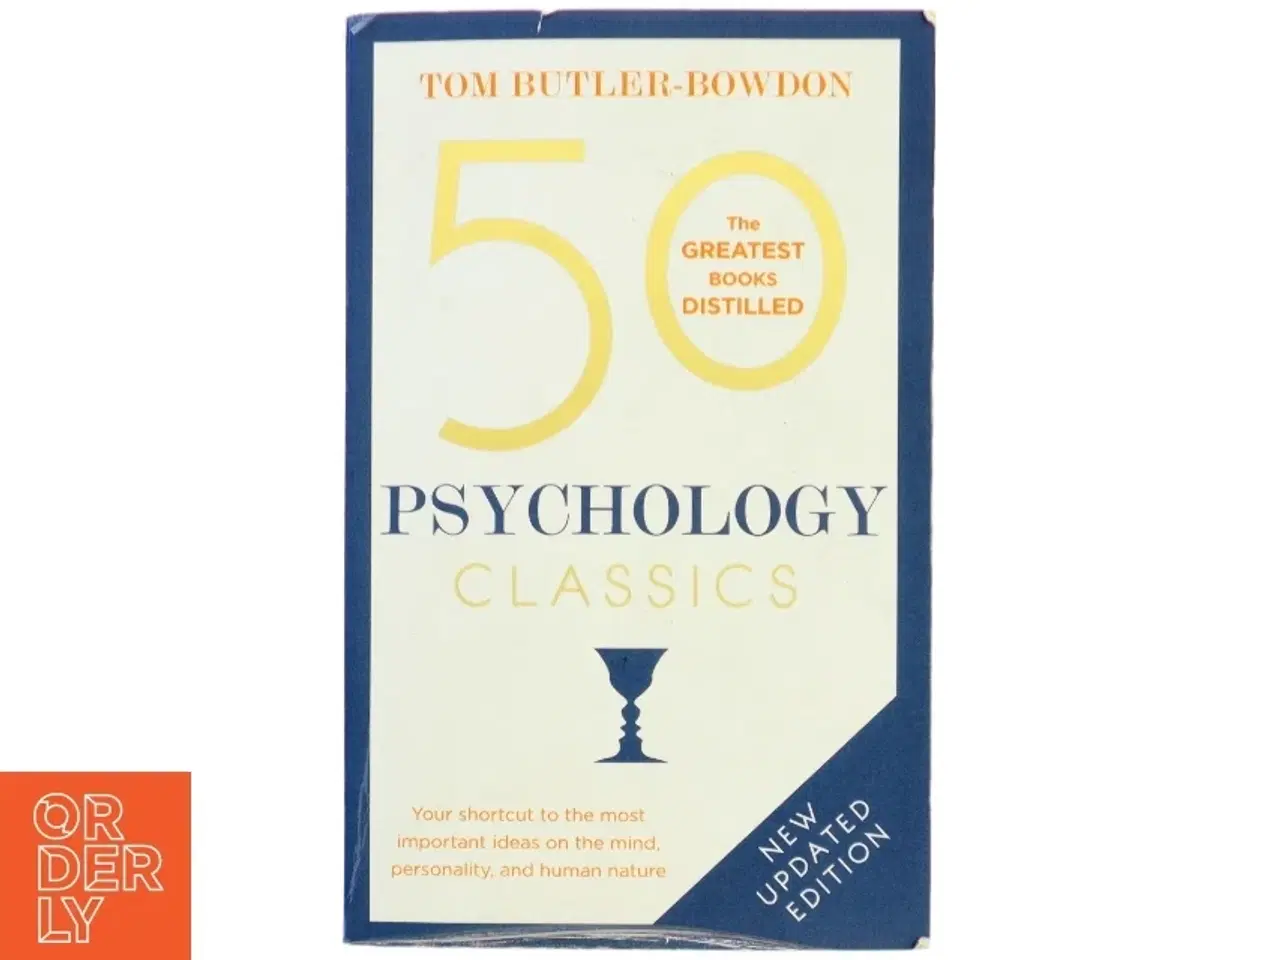 Billede 1 - 50 psychology classics : your shortcut to the most important ideas on the mind, personality, and human nature af Tom Butler-Bowdon (Bog)